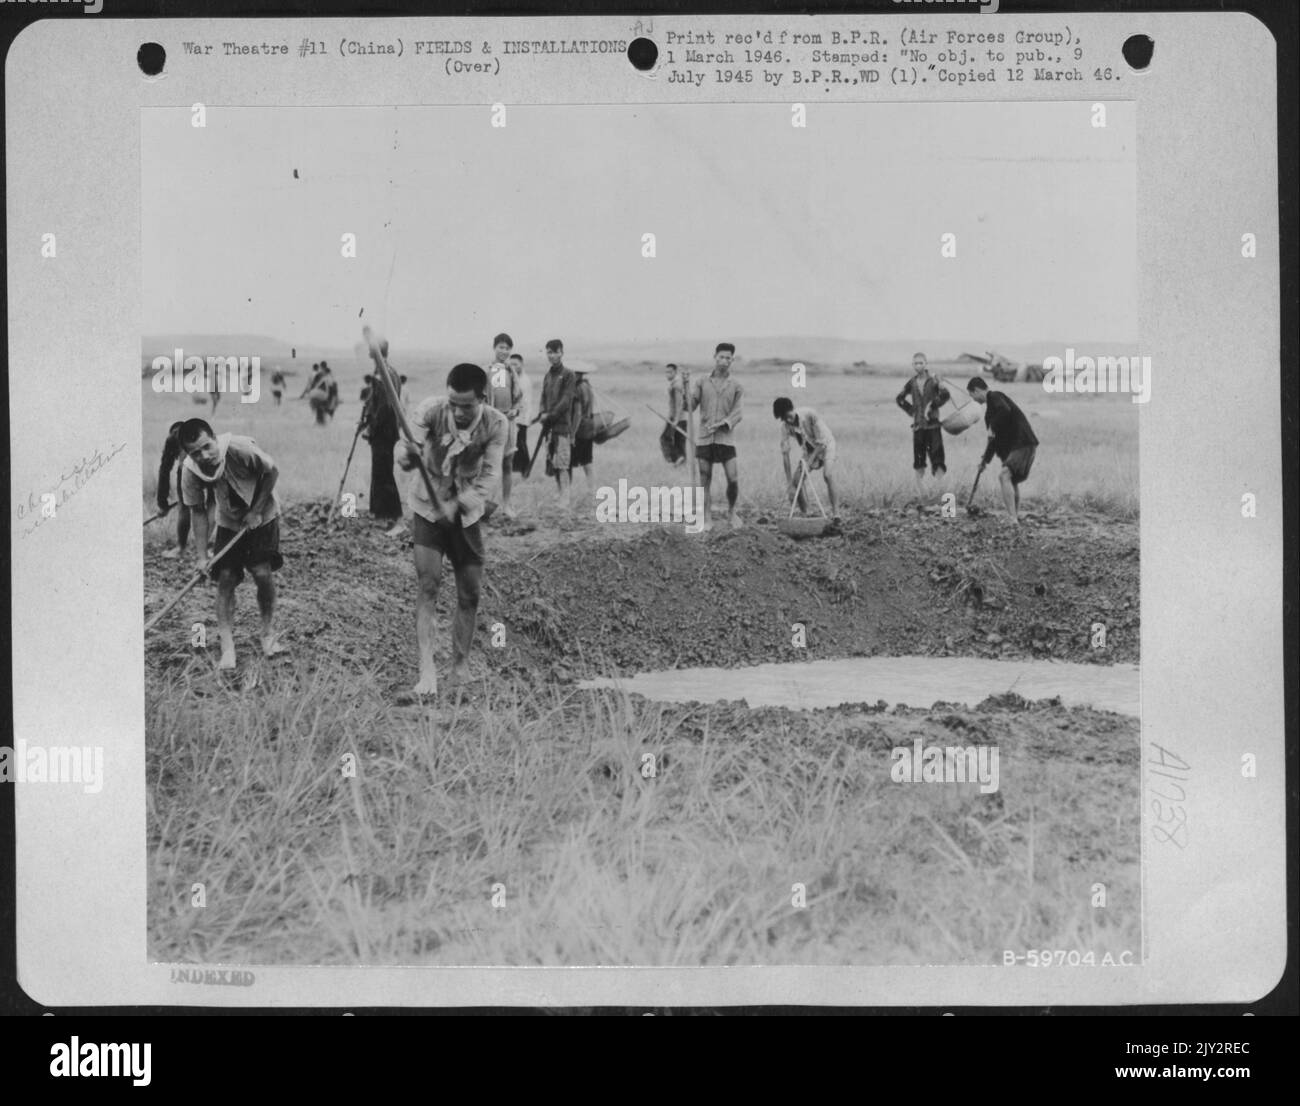 Four Days After The Japaneses Left The Nanning Airbase In China With Its Bomb Craters, Ditches And Landmines, The 14Th Af Aviation Engineers Had Rounded Up Close To A Thousand Coolies And By The End Of The Week The Ditches Were Filled And The Bomb Craters Neut Stock Photo